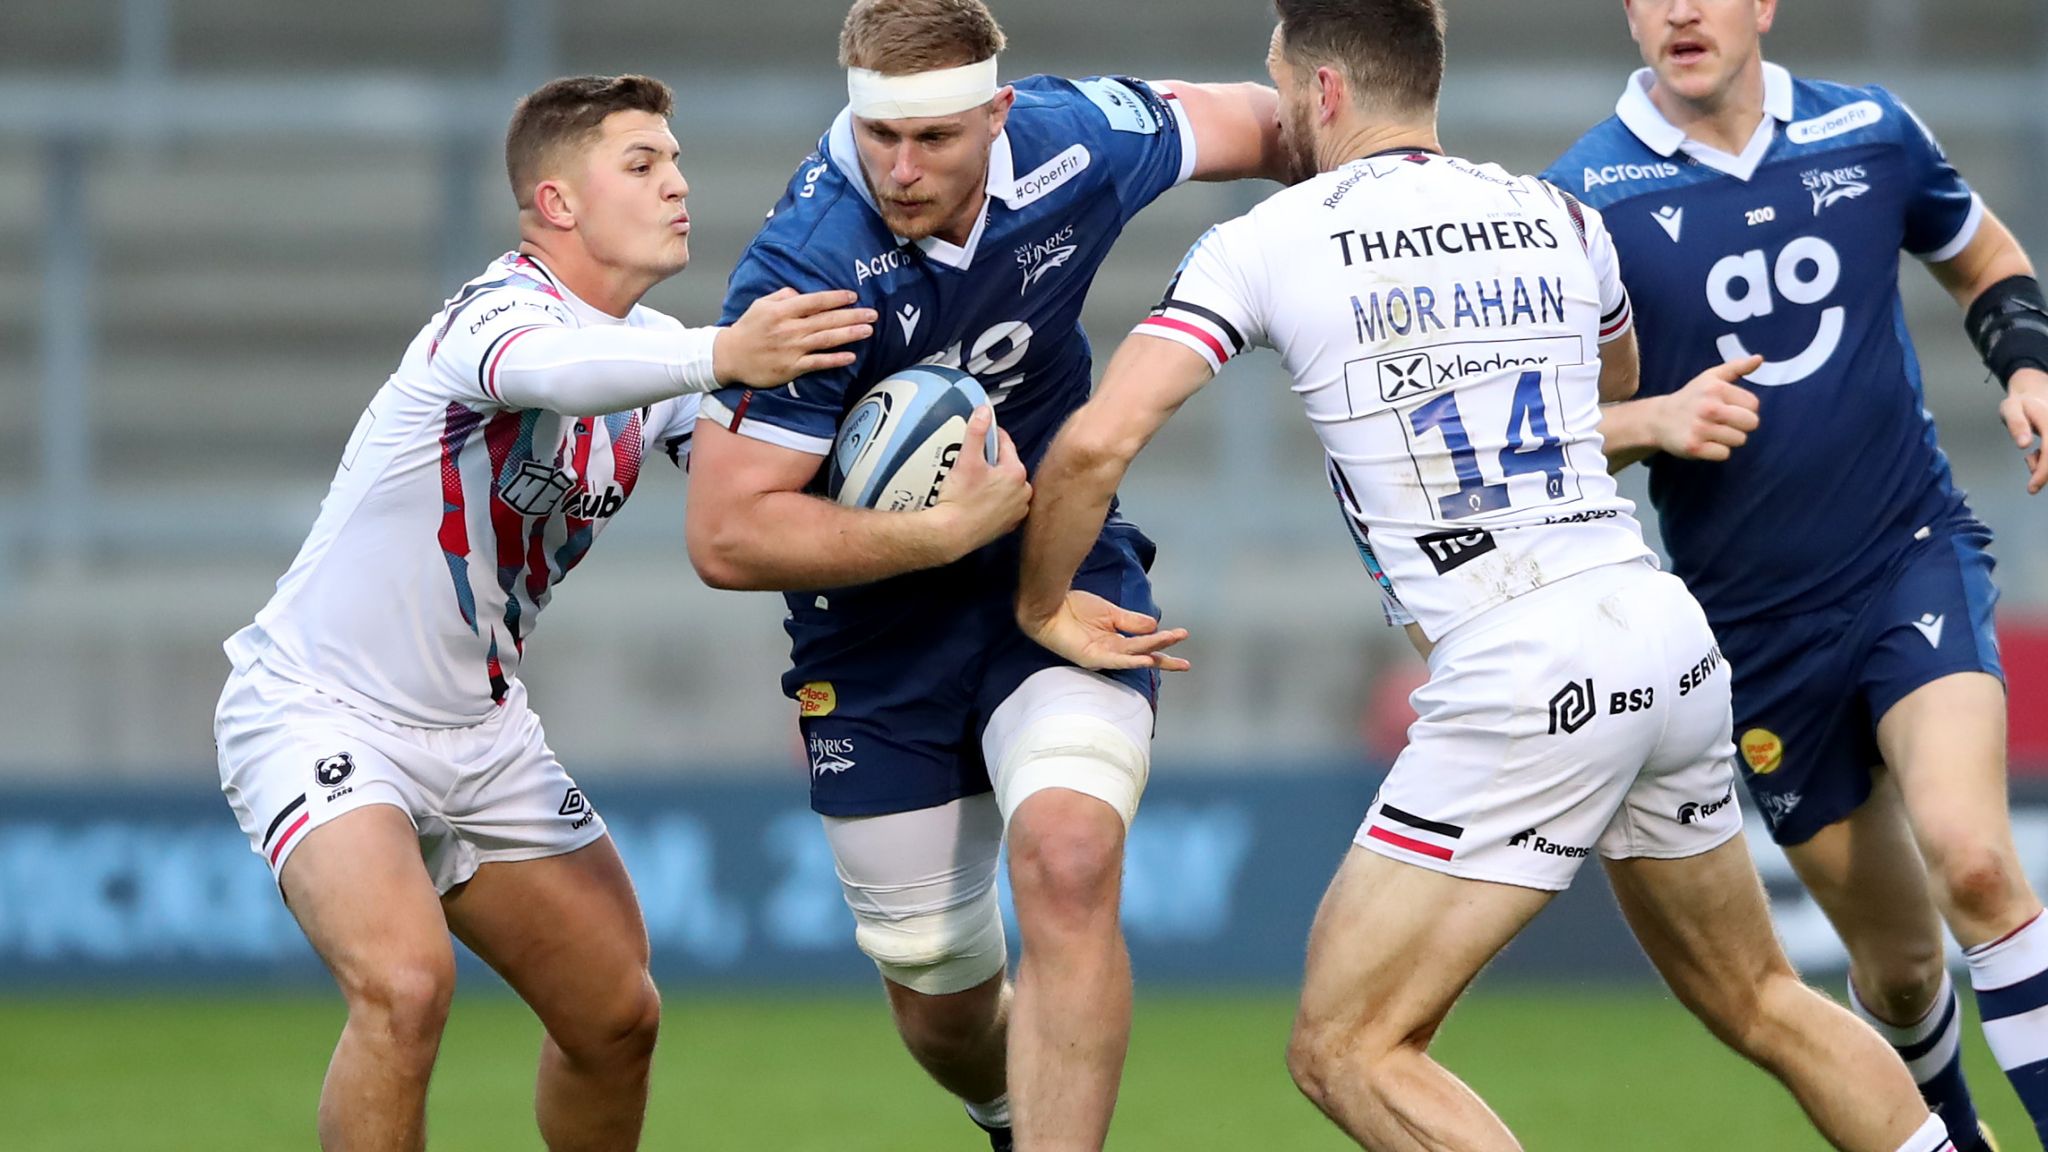 Sale Sharks 25-20 Bristol Bears Hosts continue fine Gallagher Premiership start as Du Preez brothers combine Rugby Union News Sky Sports